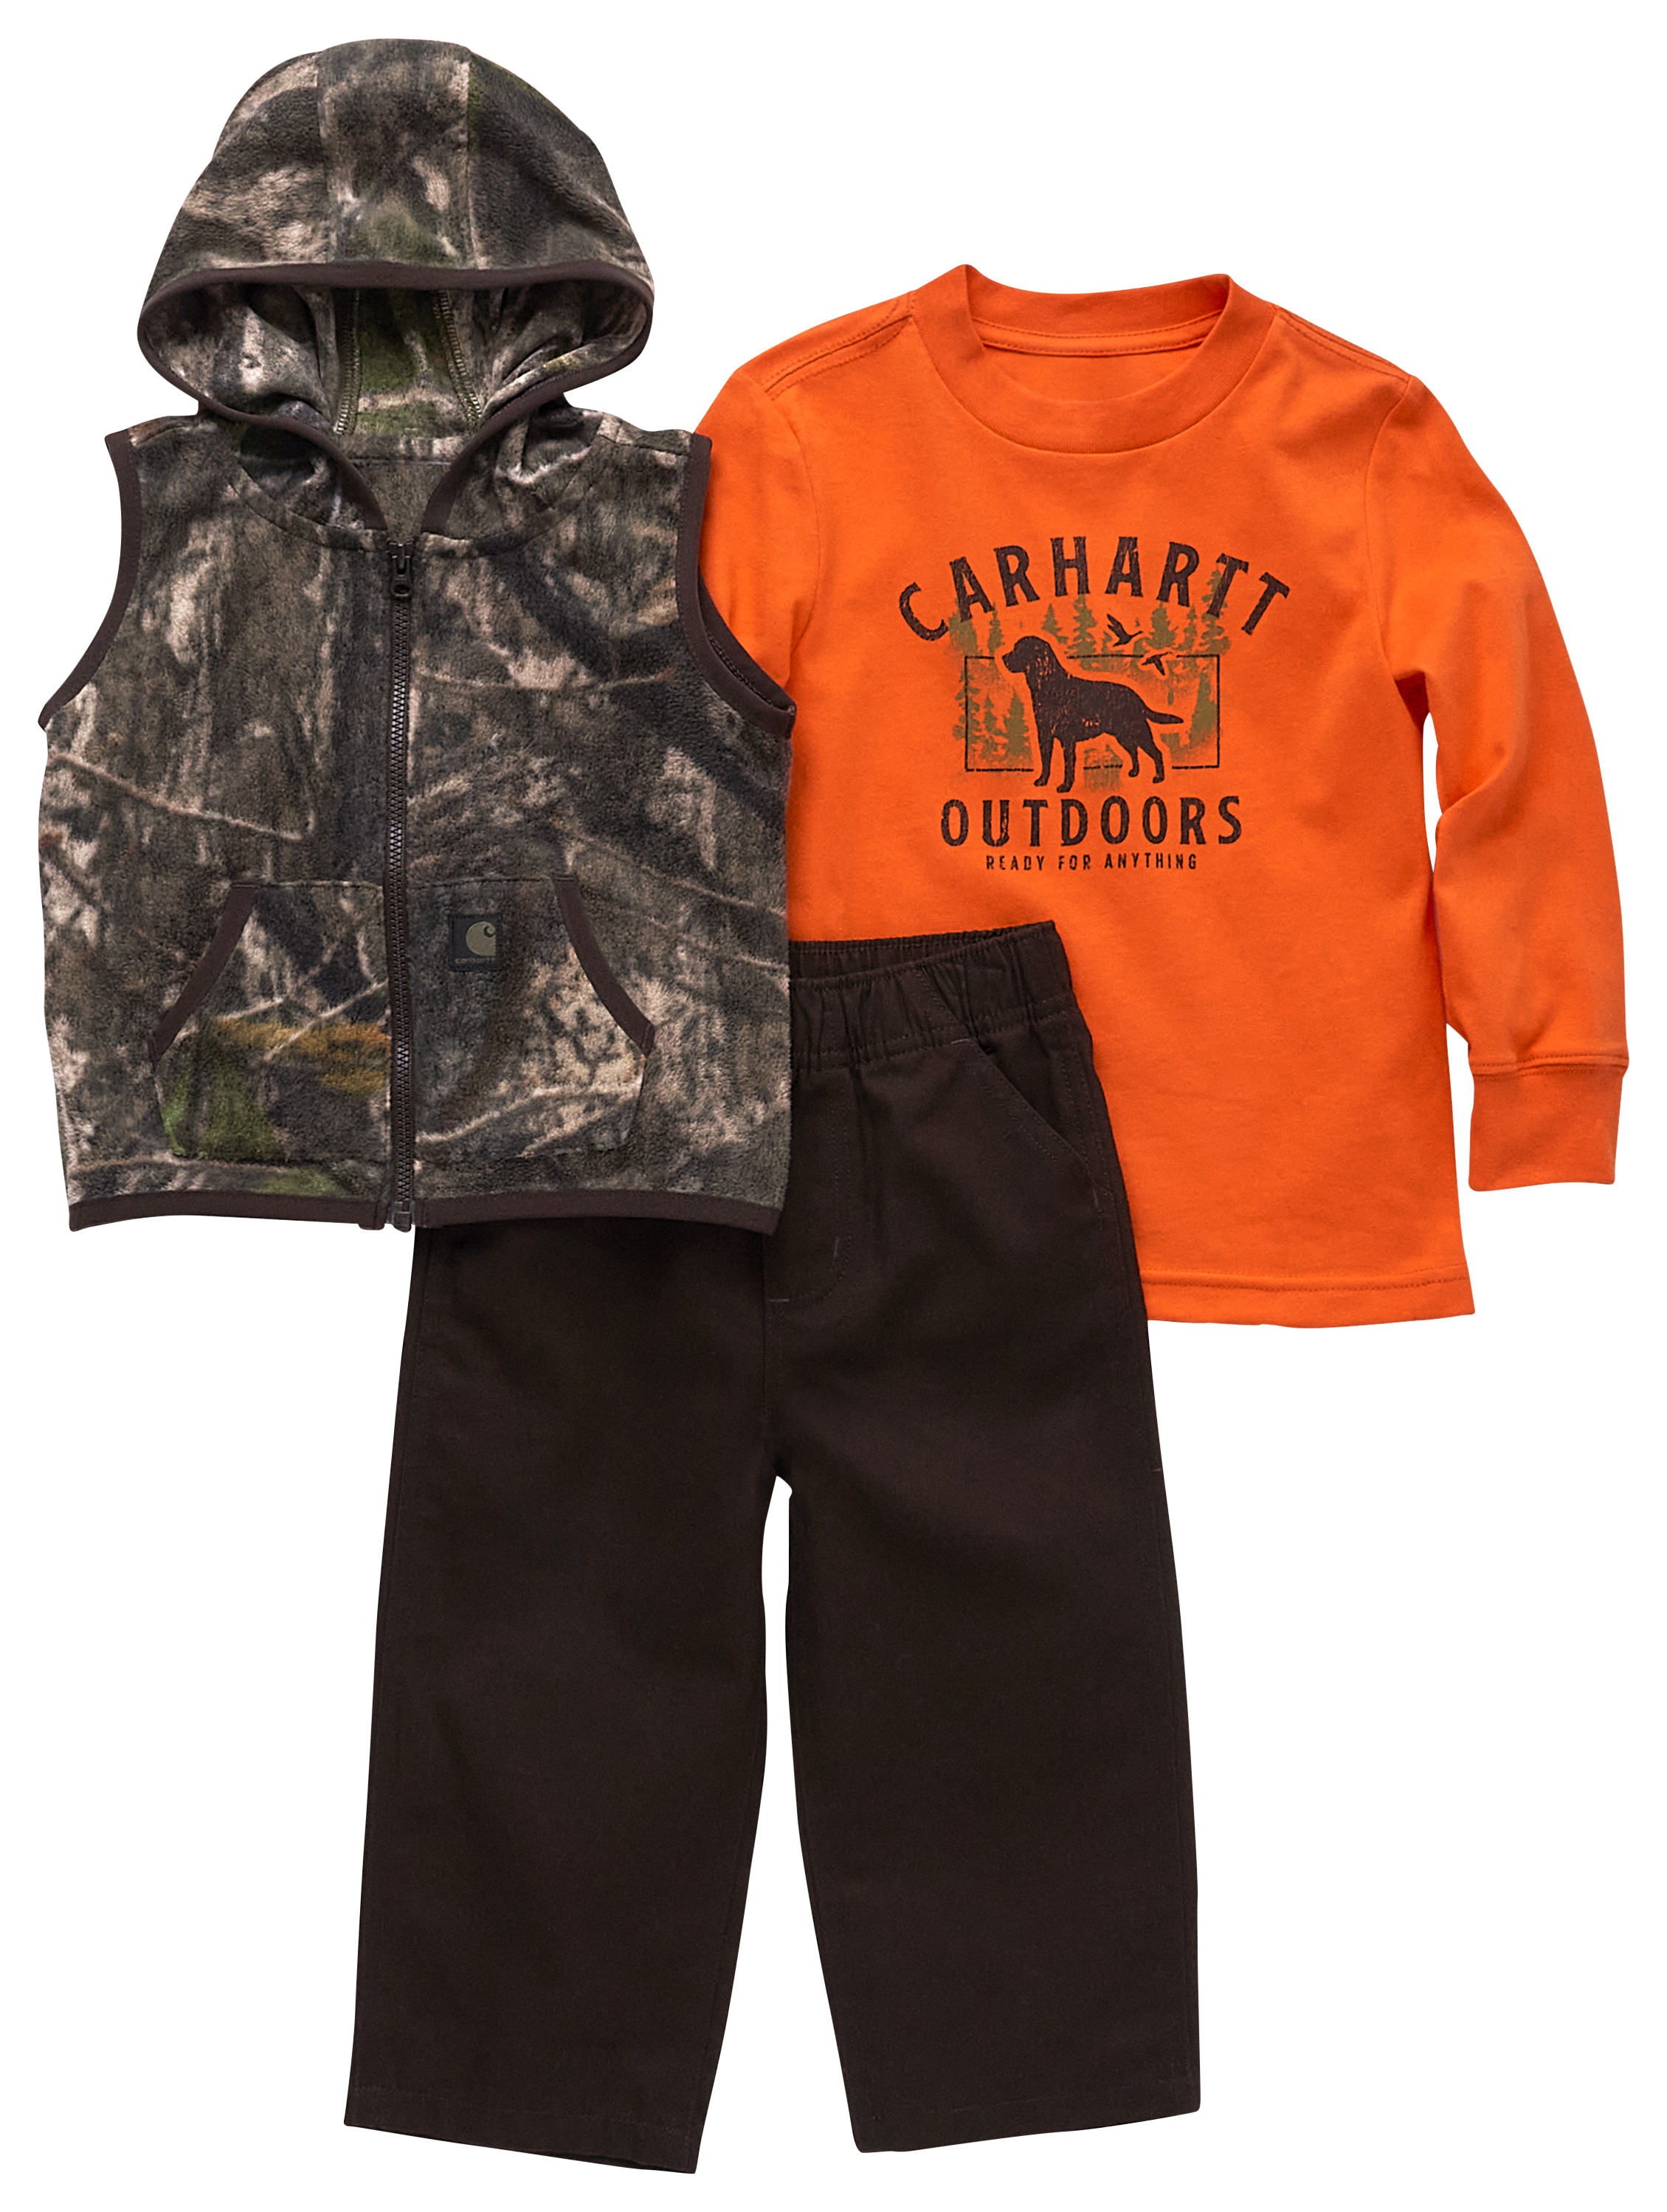 Carhartt Long-Sleeve T-Shirt, Camo Vest, and Canvas Pants 3-Piece Set for Babies - Mossy Oak Country DNA - 6 Months